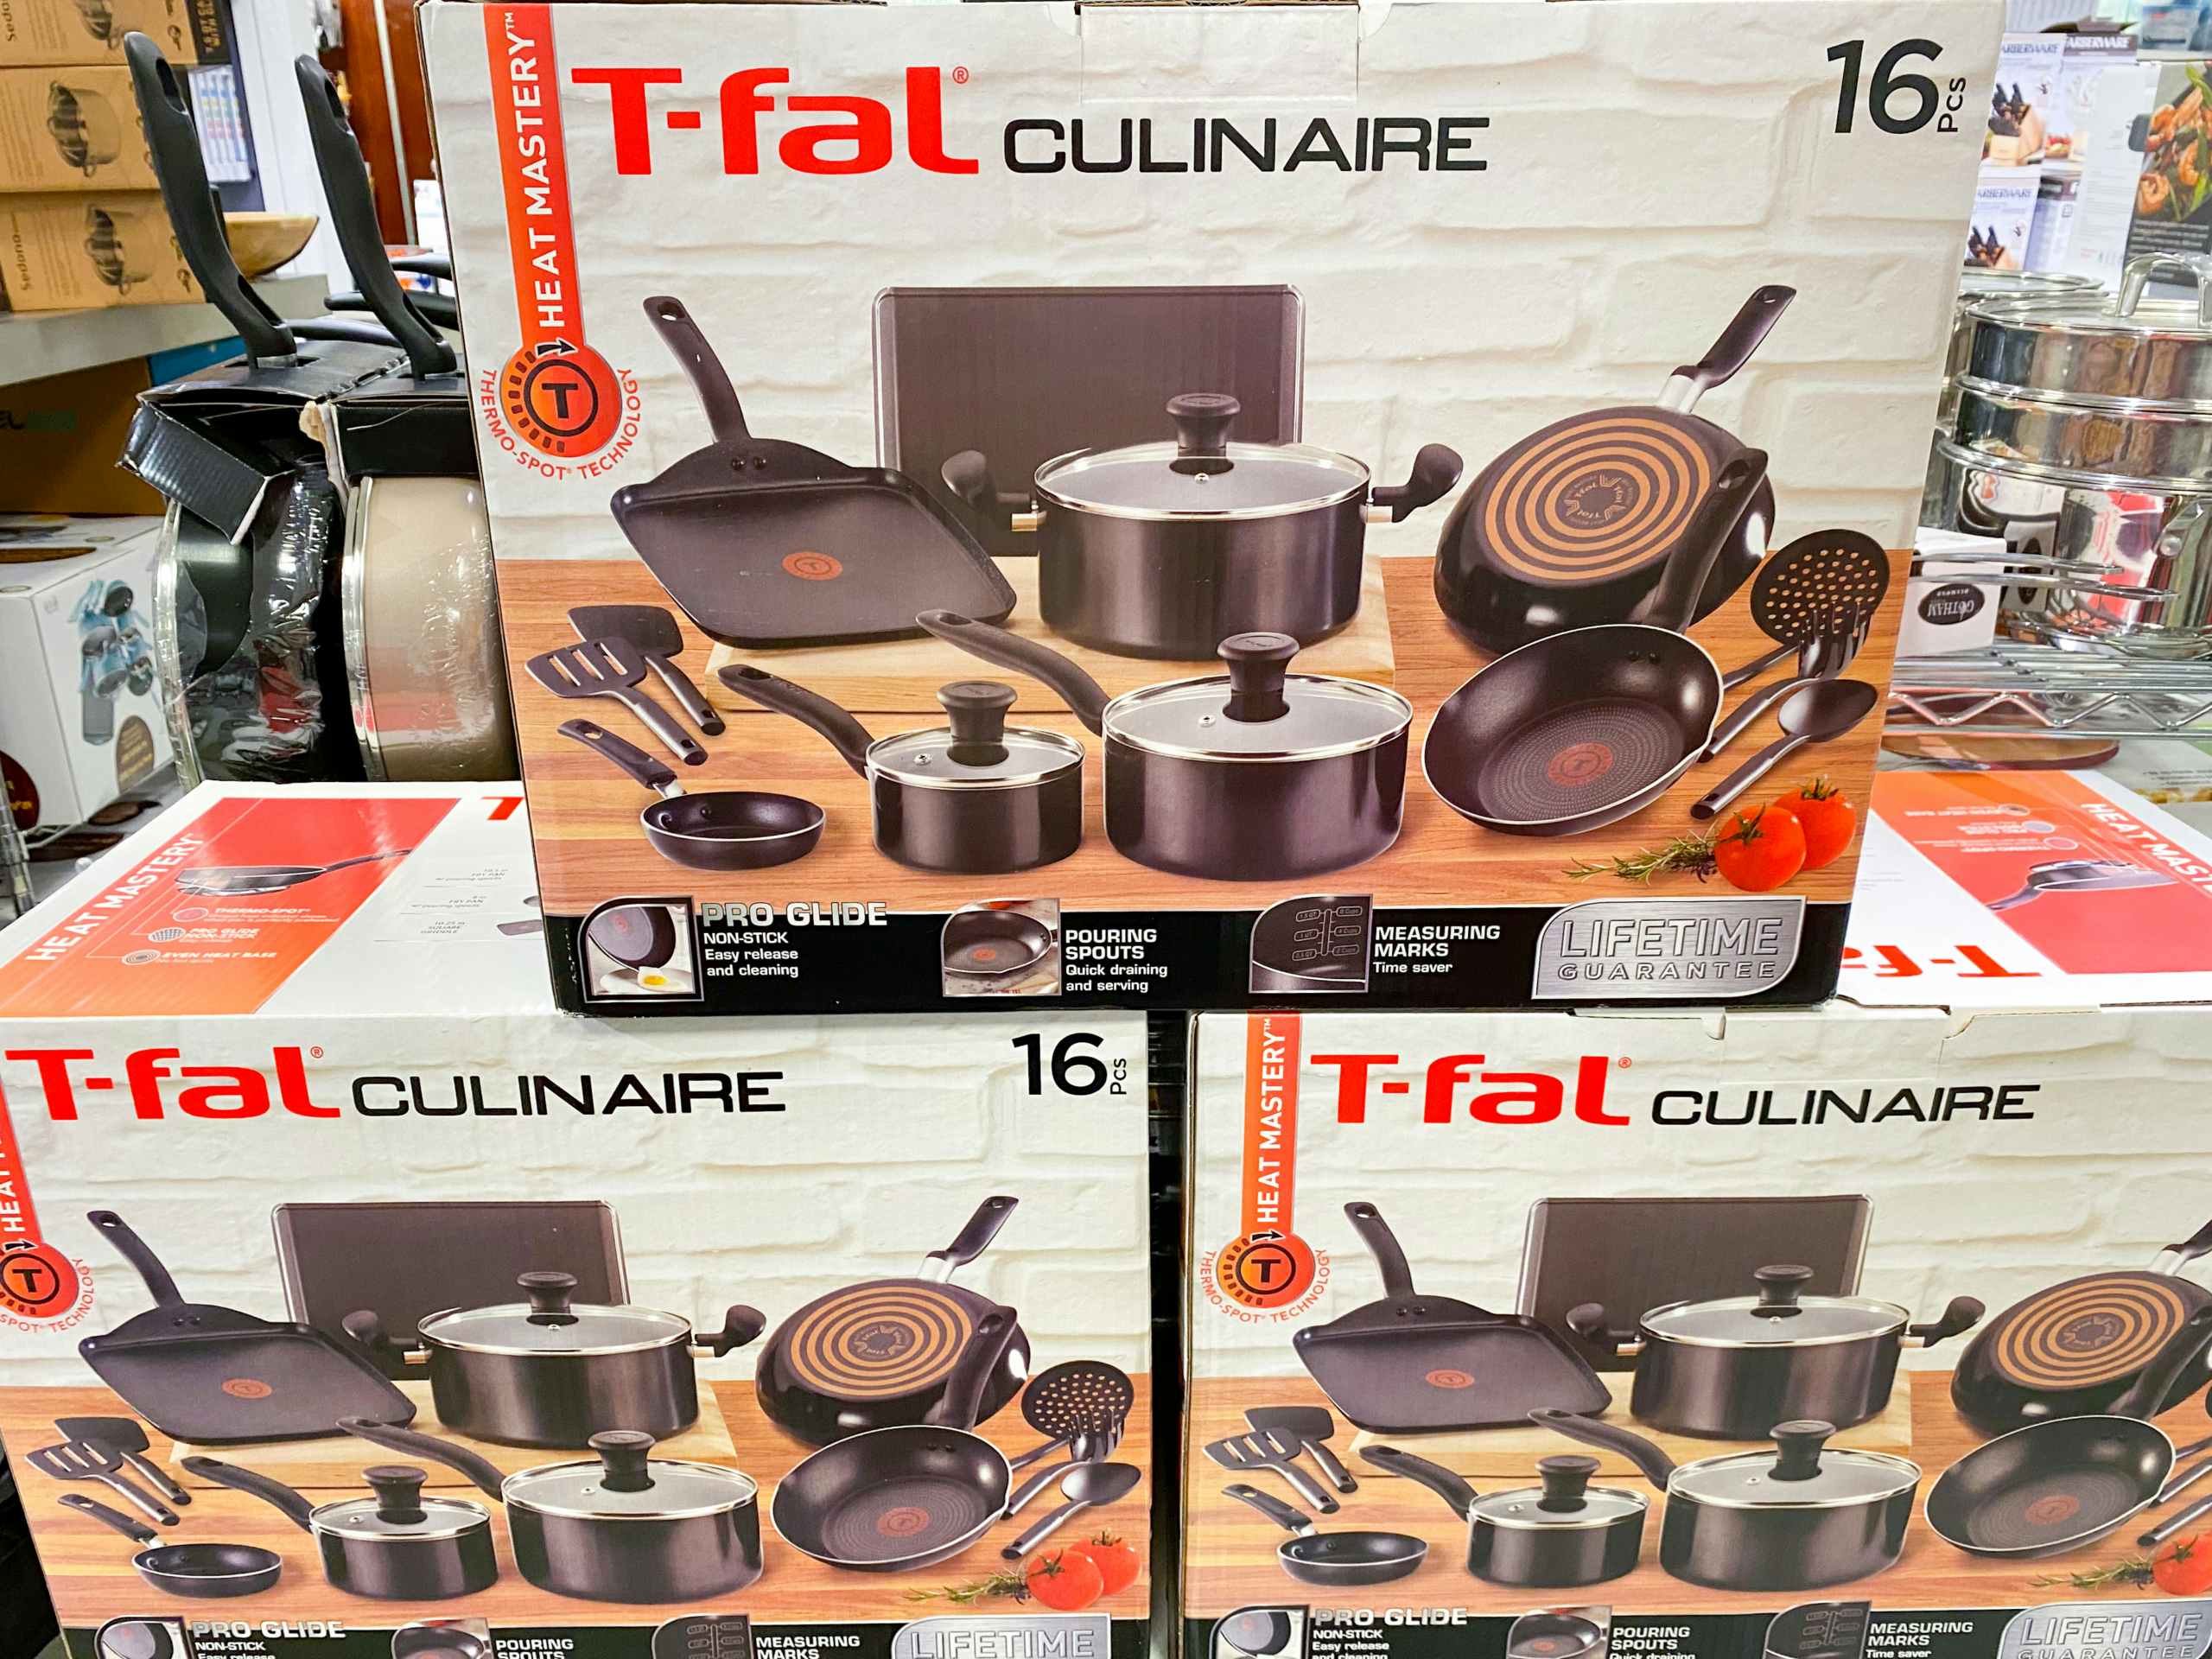 t-fal cookware sets stacked on top of each other in macys